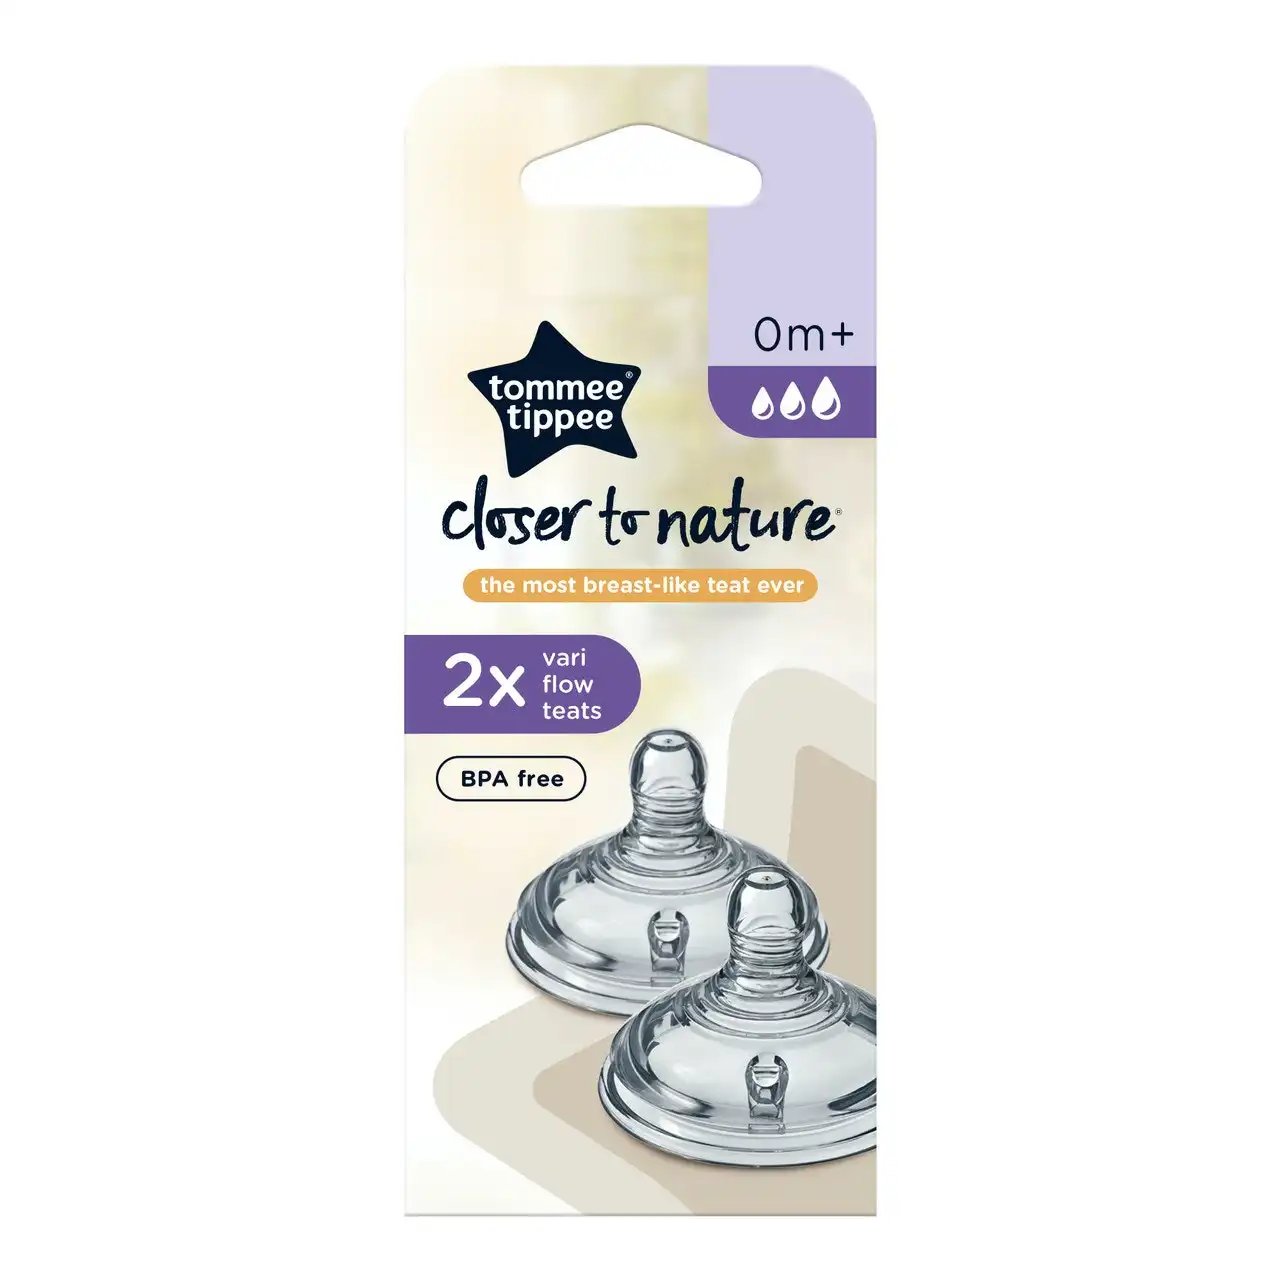 Tommee Tippee Closer to Nature Vari Flow Teats, 2 Pack, 0m+